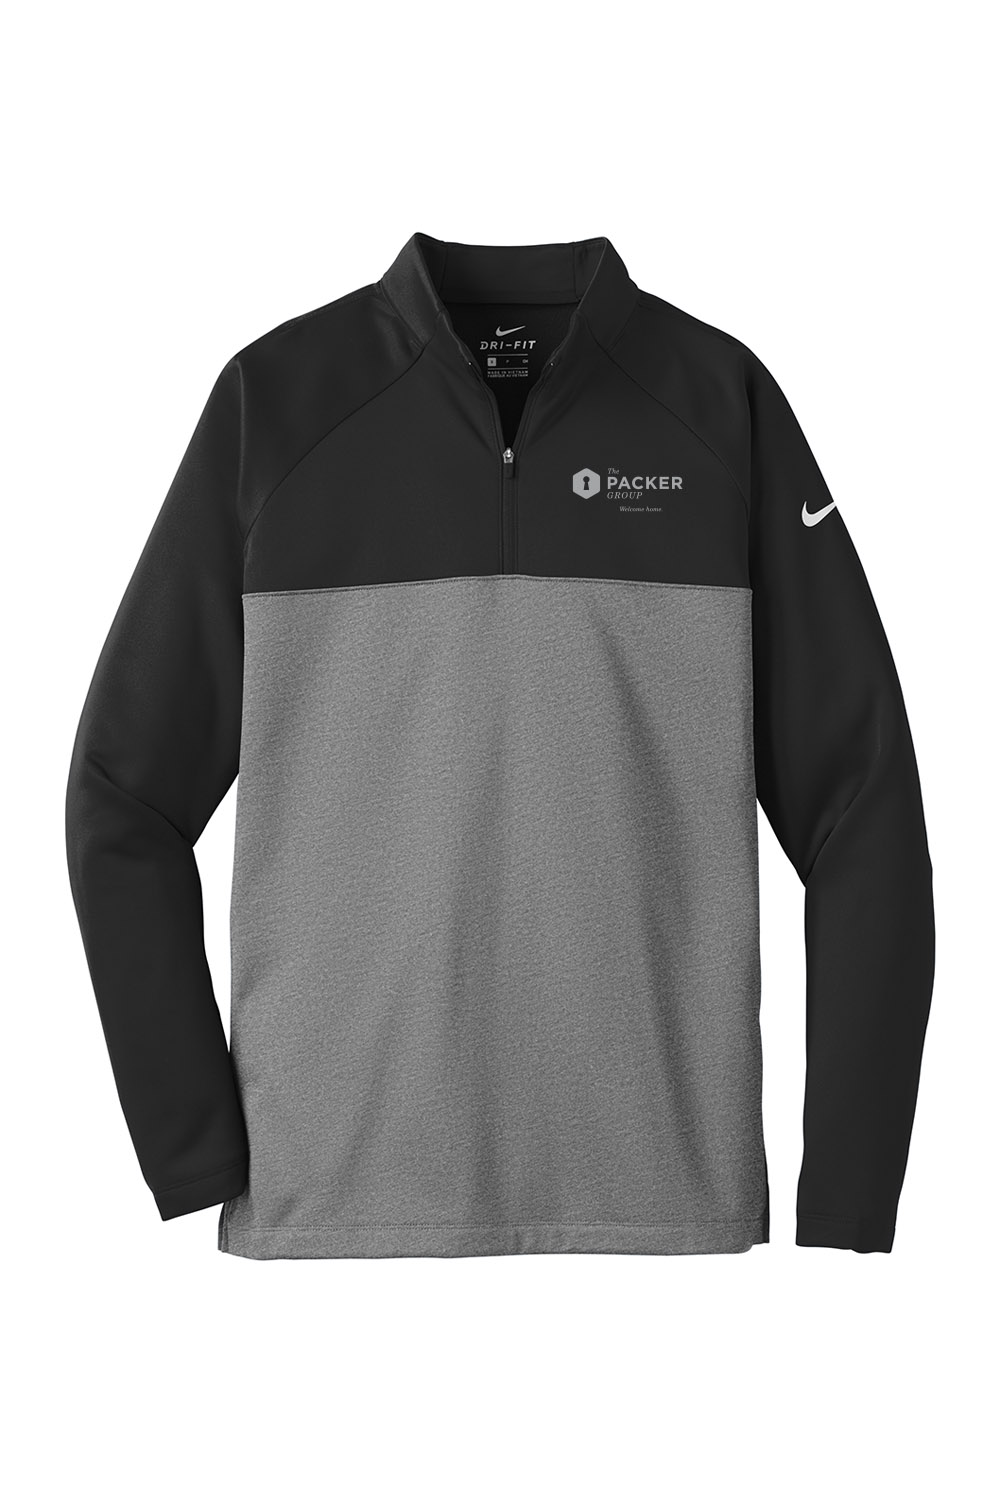 Nike Therma-FIT 1/2-Zip Fleece – The Packer Group Promotional Products